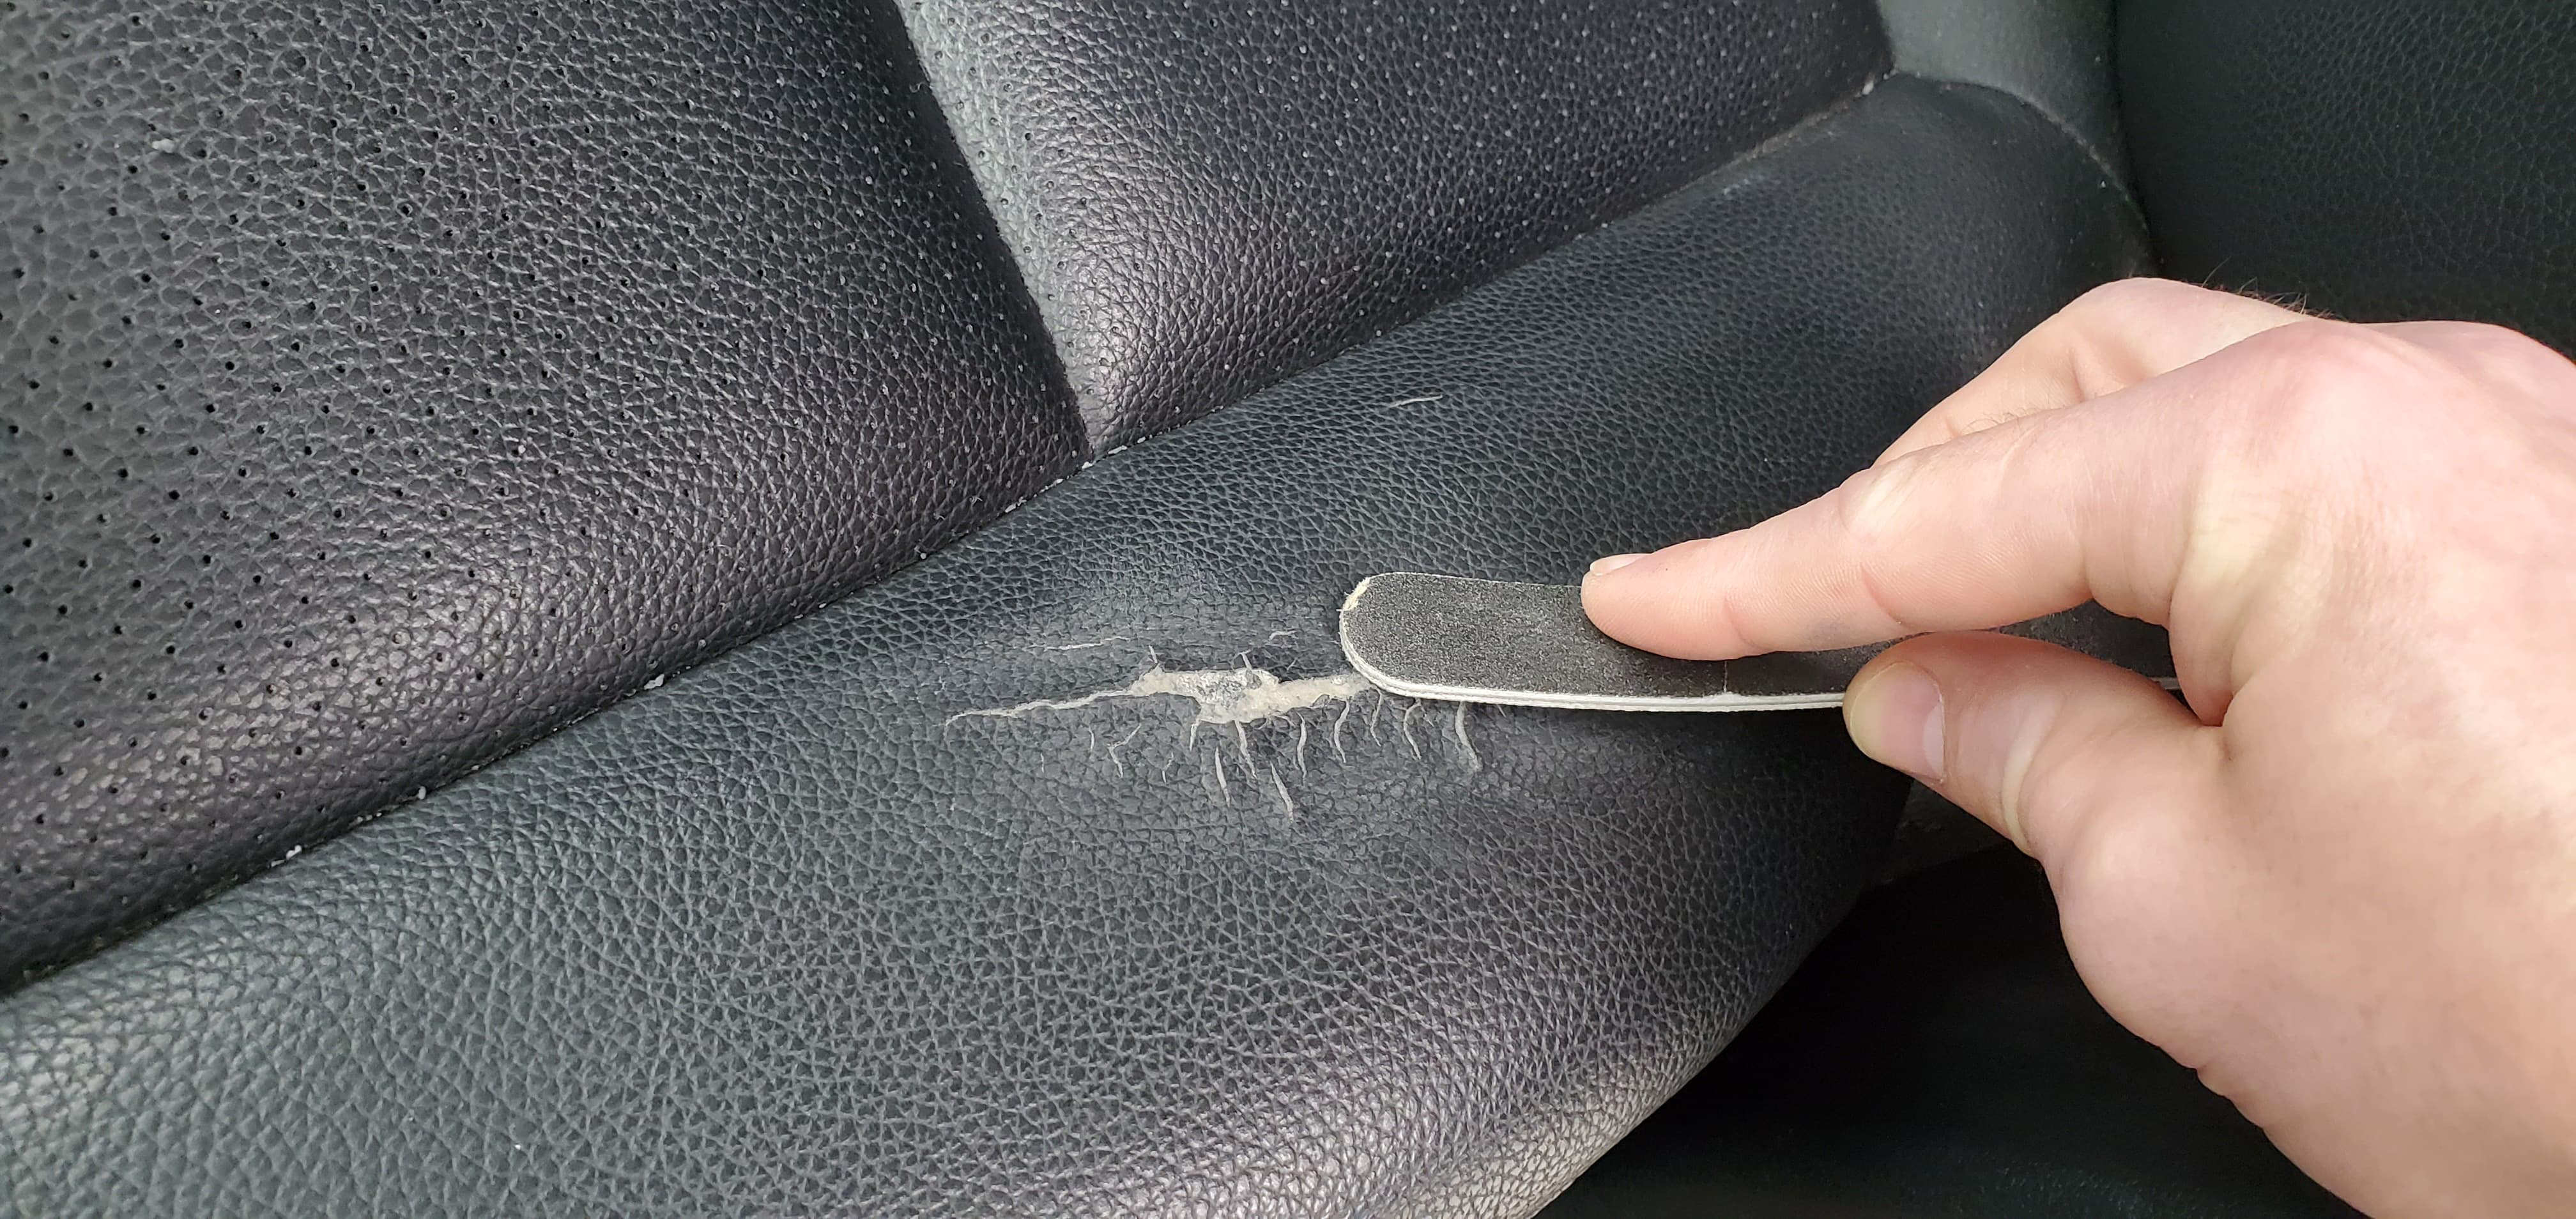 How To Repair A Leather Car Seat - How To Repair Leather And Vinyl Car Seats